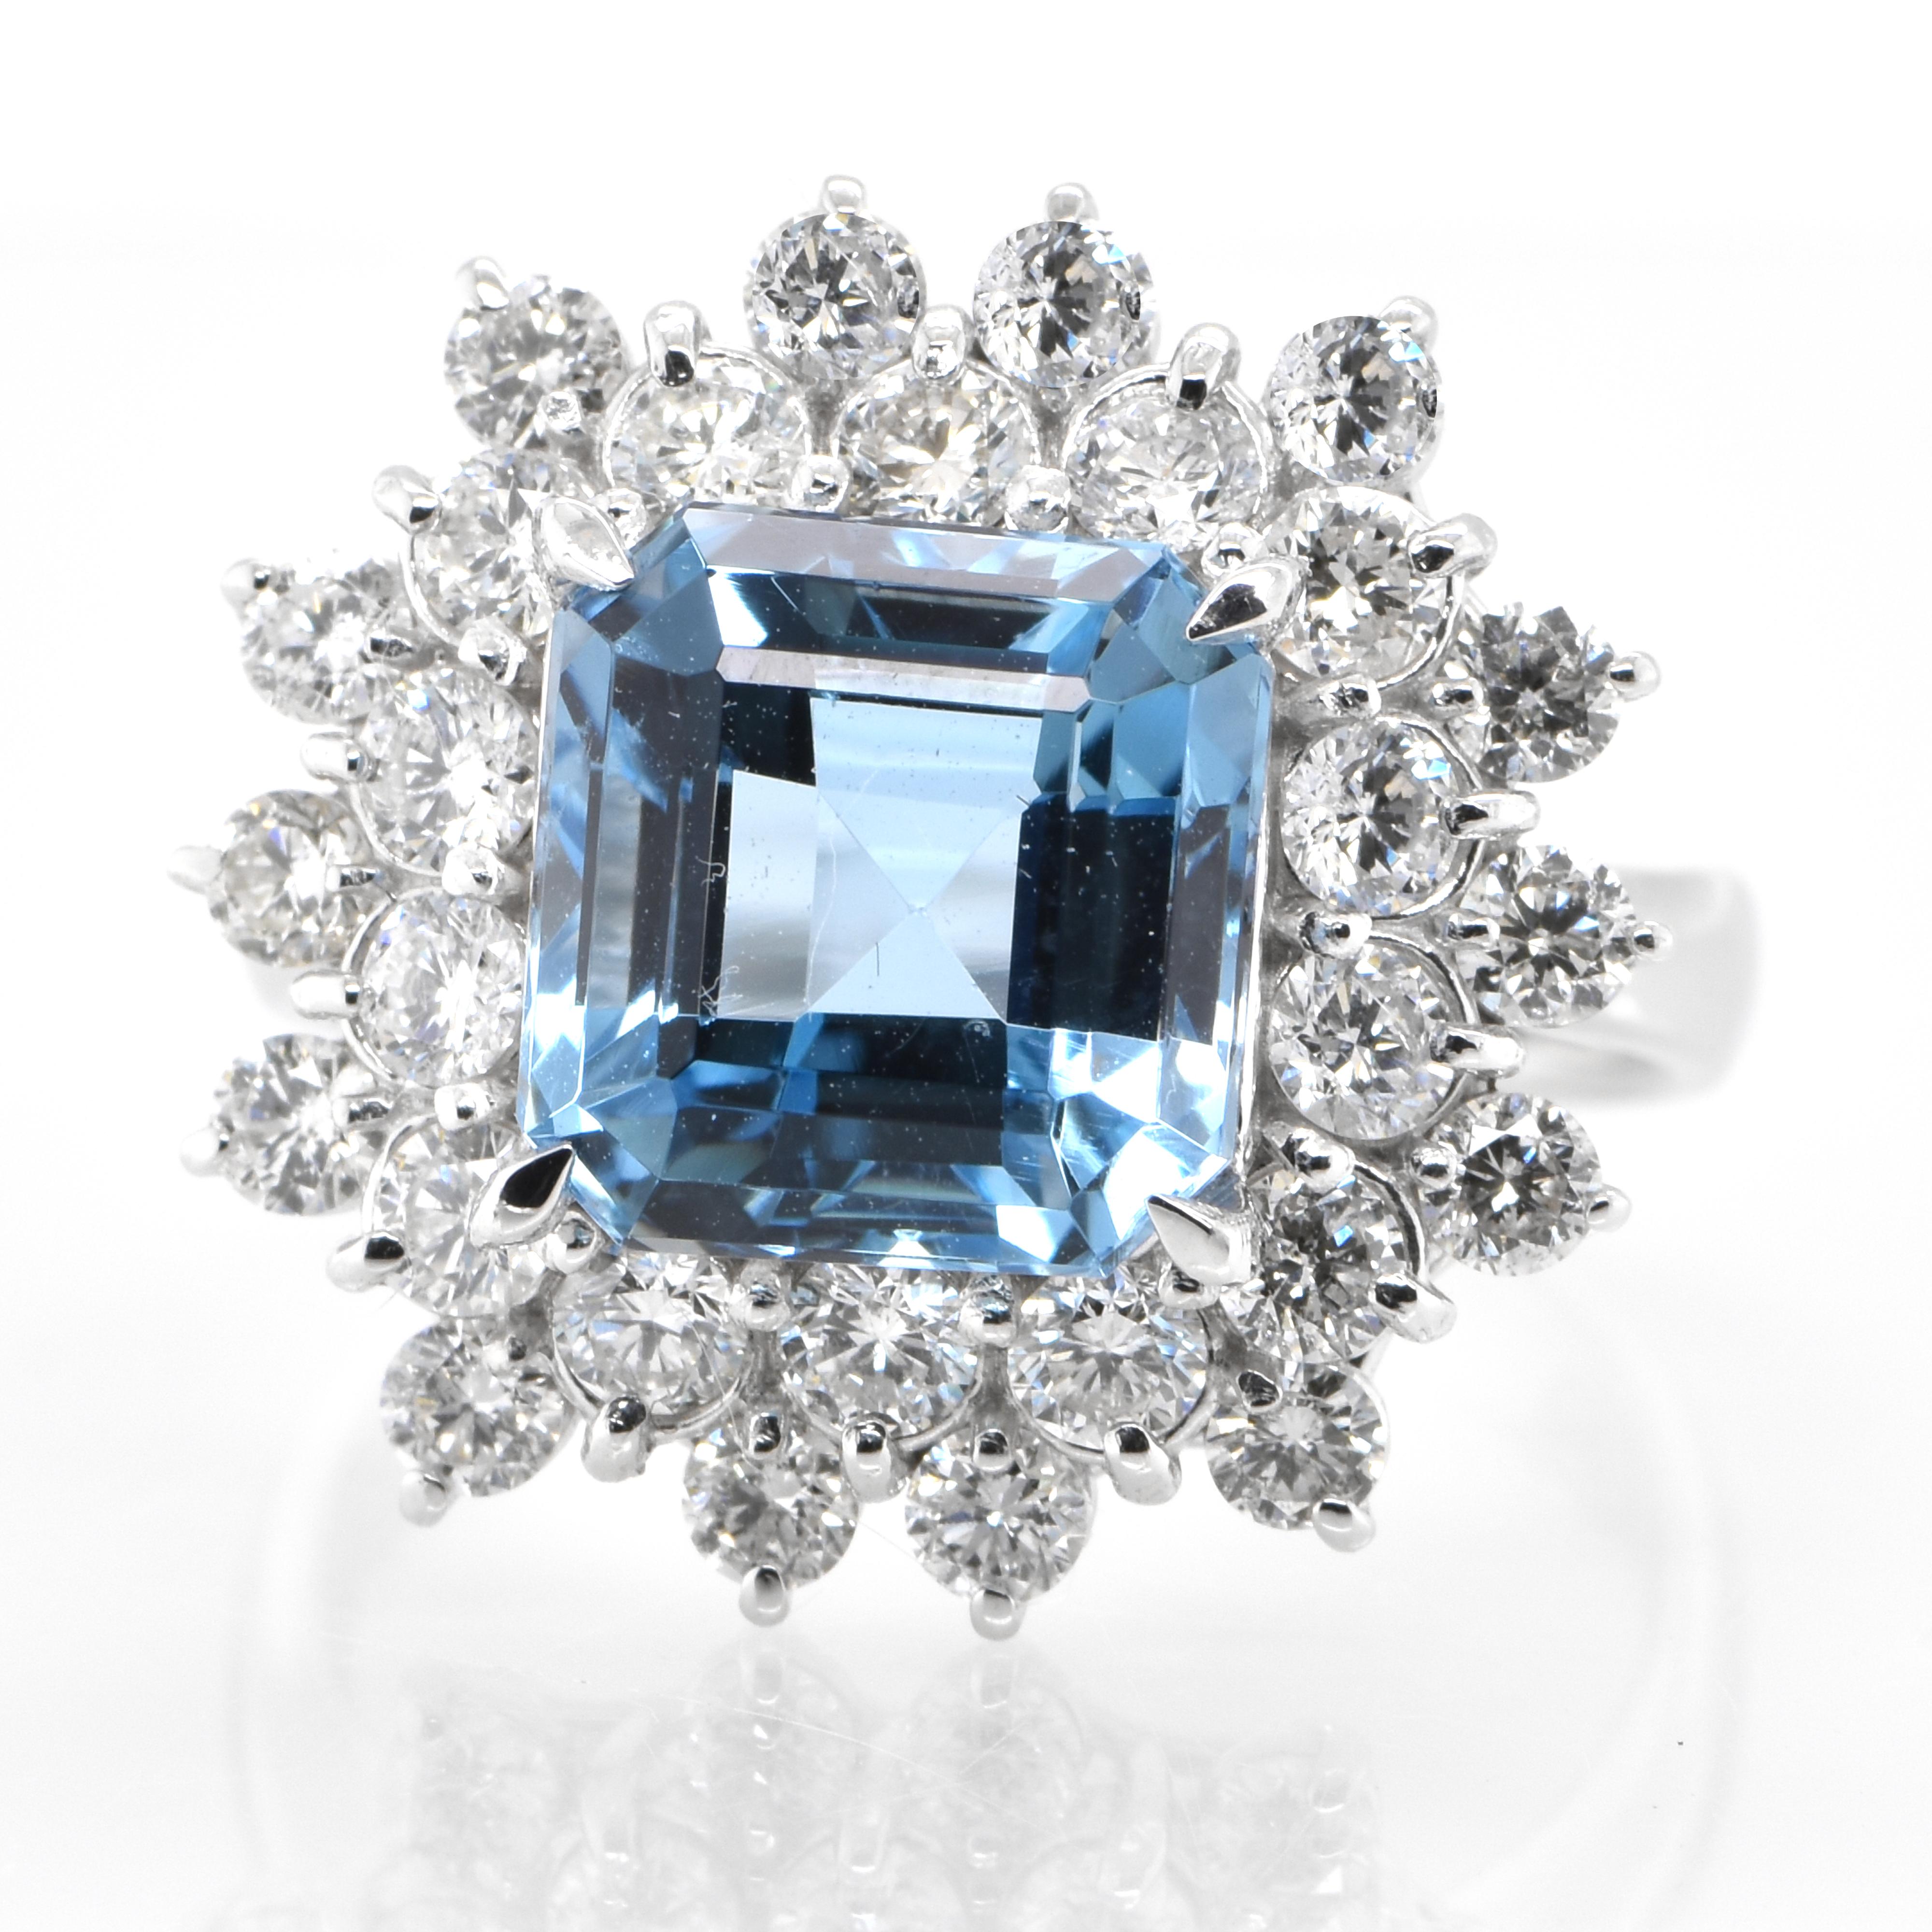 A beautiful Cocktail Ring featuring a 3.62 Carat, Natural, Aquamarine and 1.27 Carats of Diamond Accents set in Platinum. Aquamarines have been prized gems throughout human history for their cool blue color. They historically come from the Minas